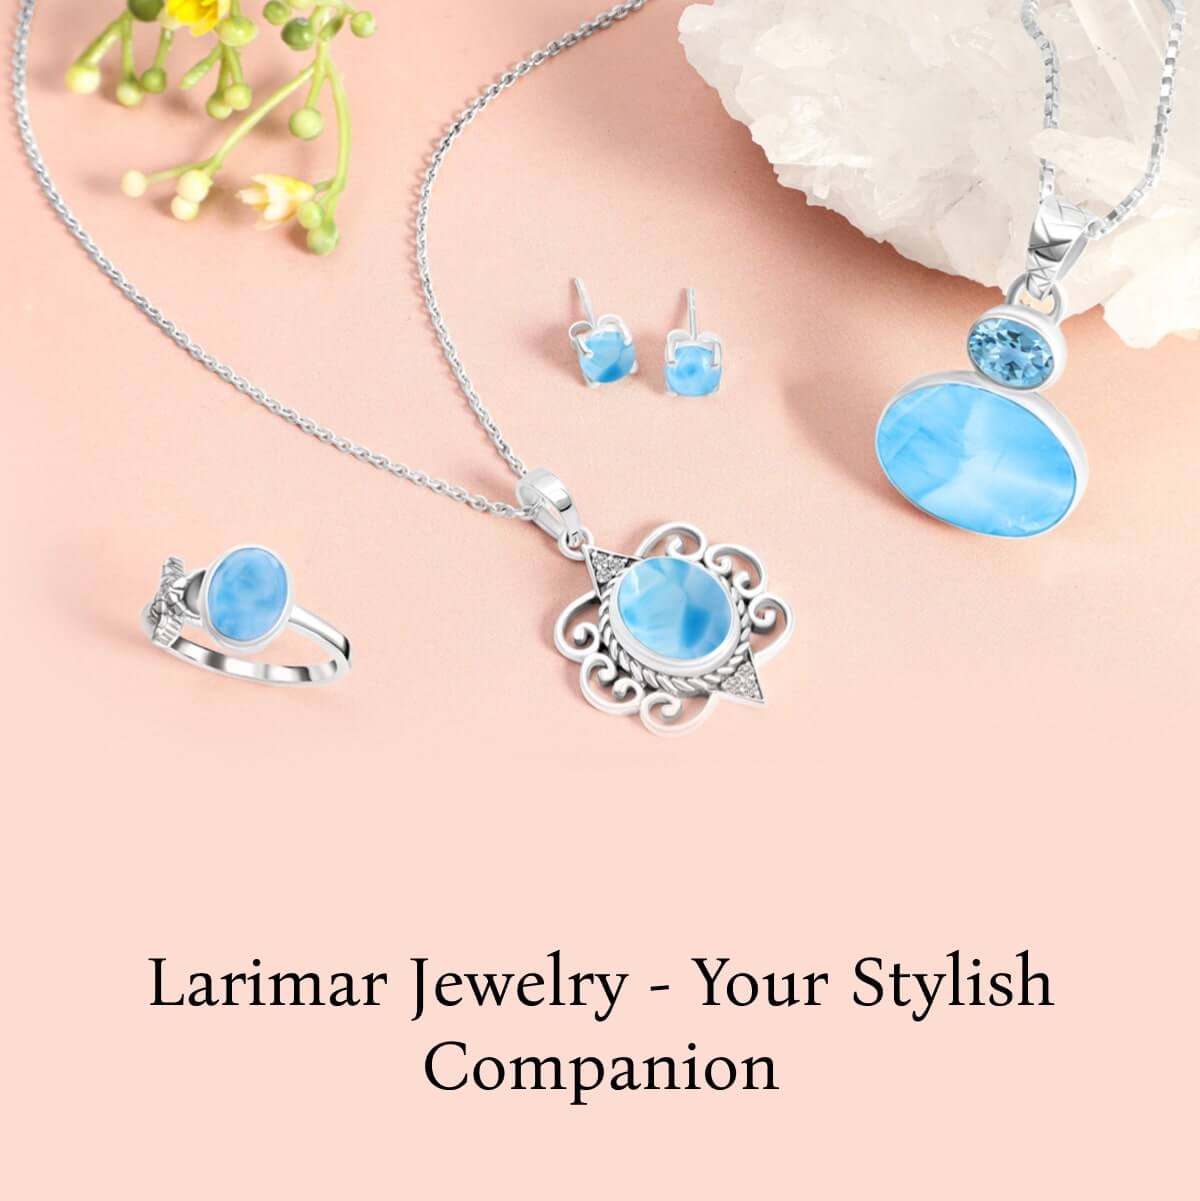 Larimar Jewelry Styling Ideas For Every Occasion and More